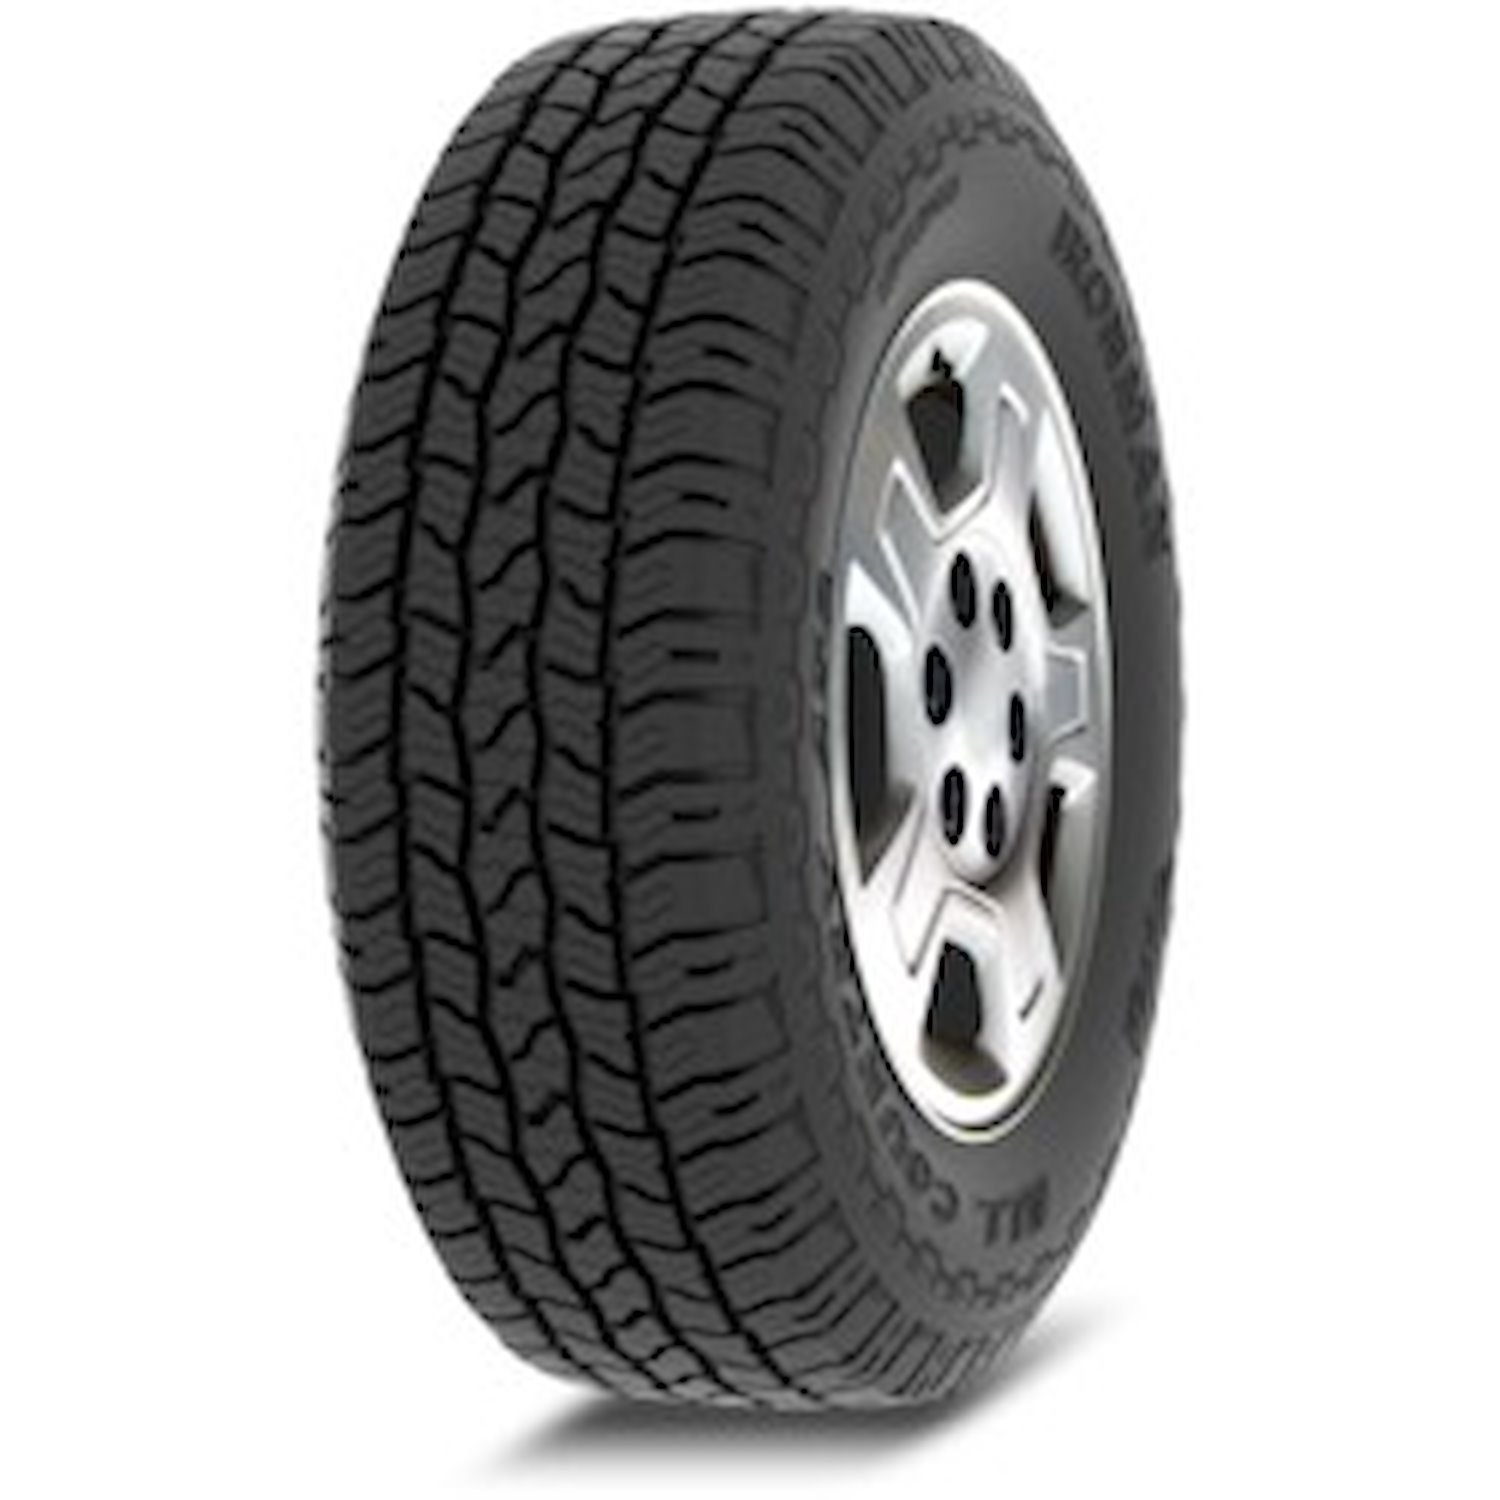 07600 All Country AT2 Tire, 265/75R16, 116T